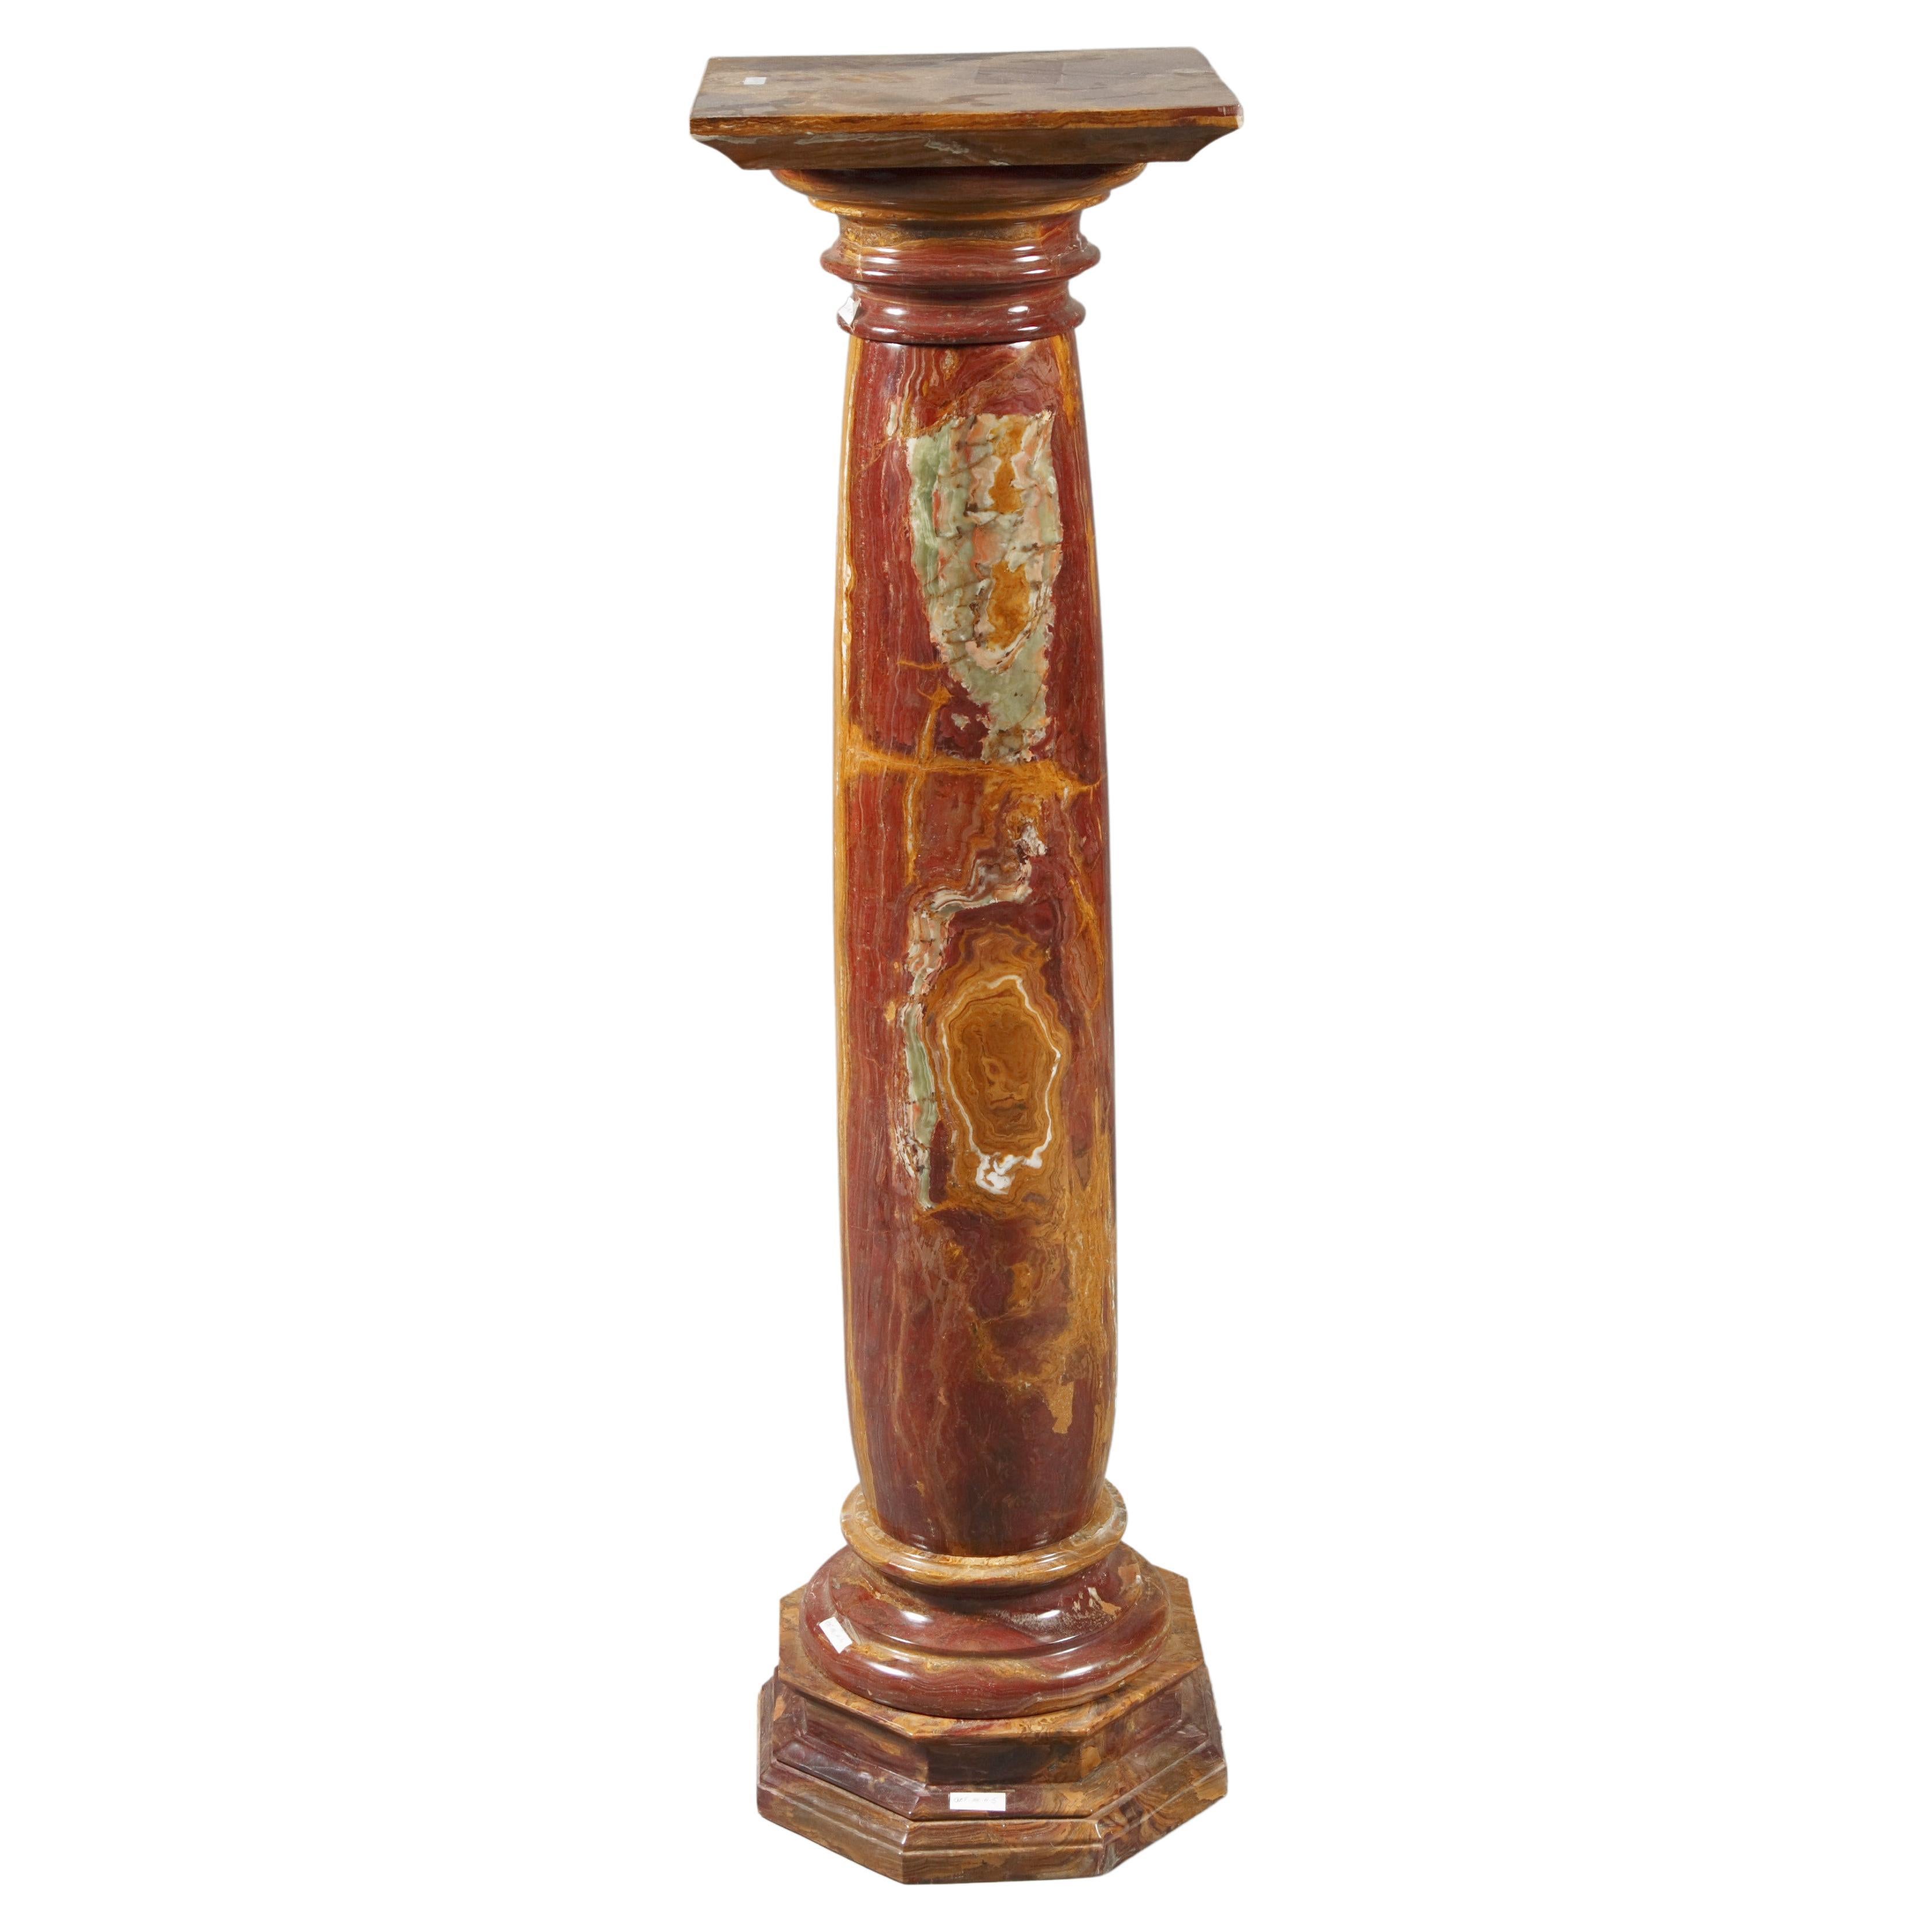 20th Century Quality Marble Pillar / Column in Neoclassical Style